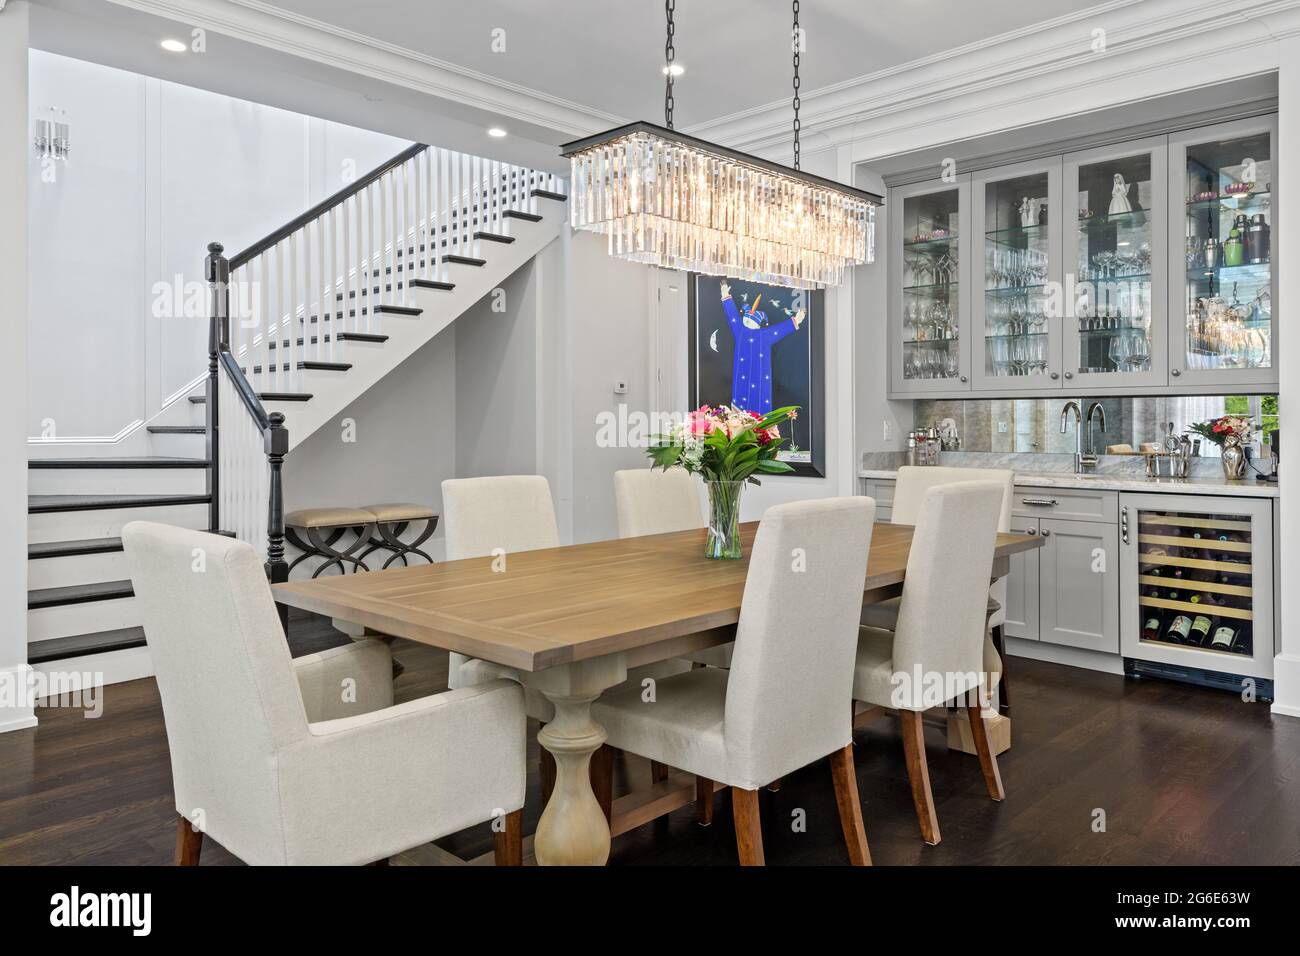 Residential Interior - Dining Room Stock Photo